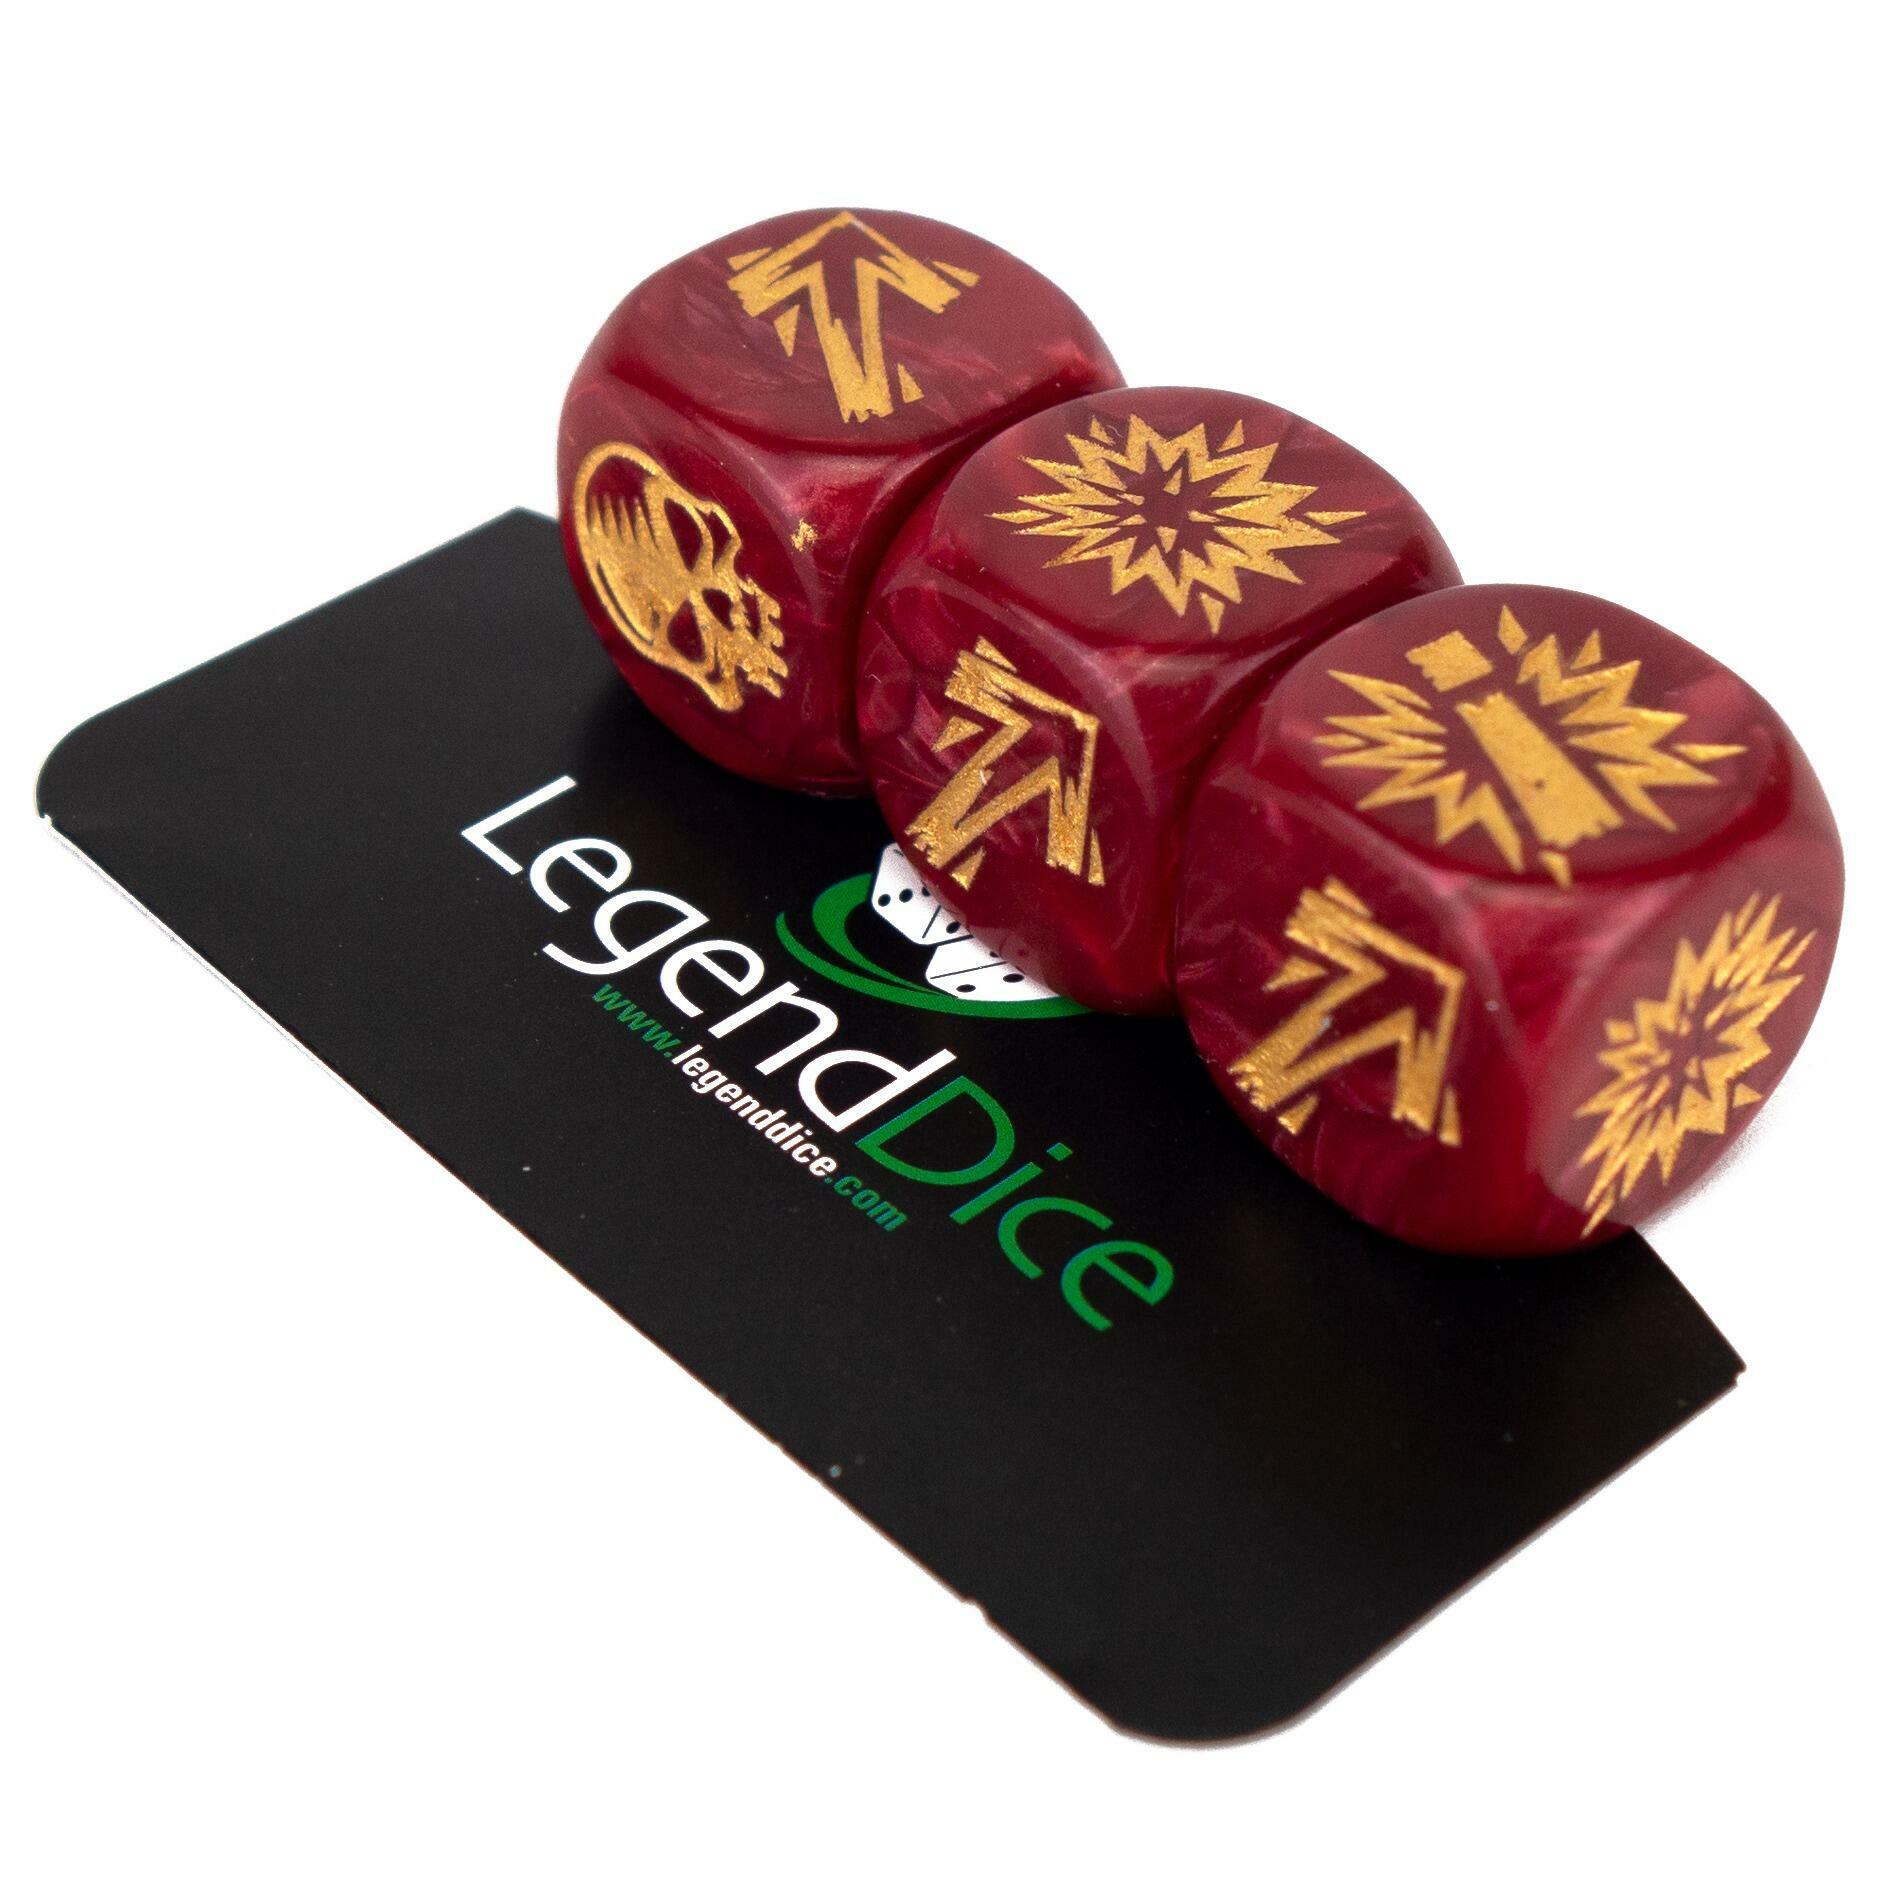 Picture of Blocking Dice Set - Pearl Burgundy (Gold) with bag